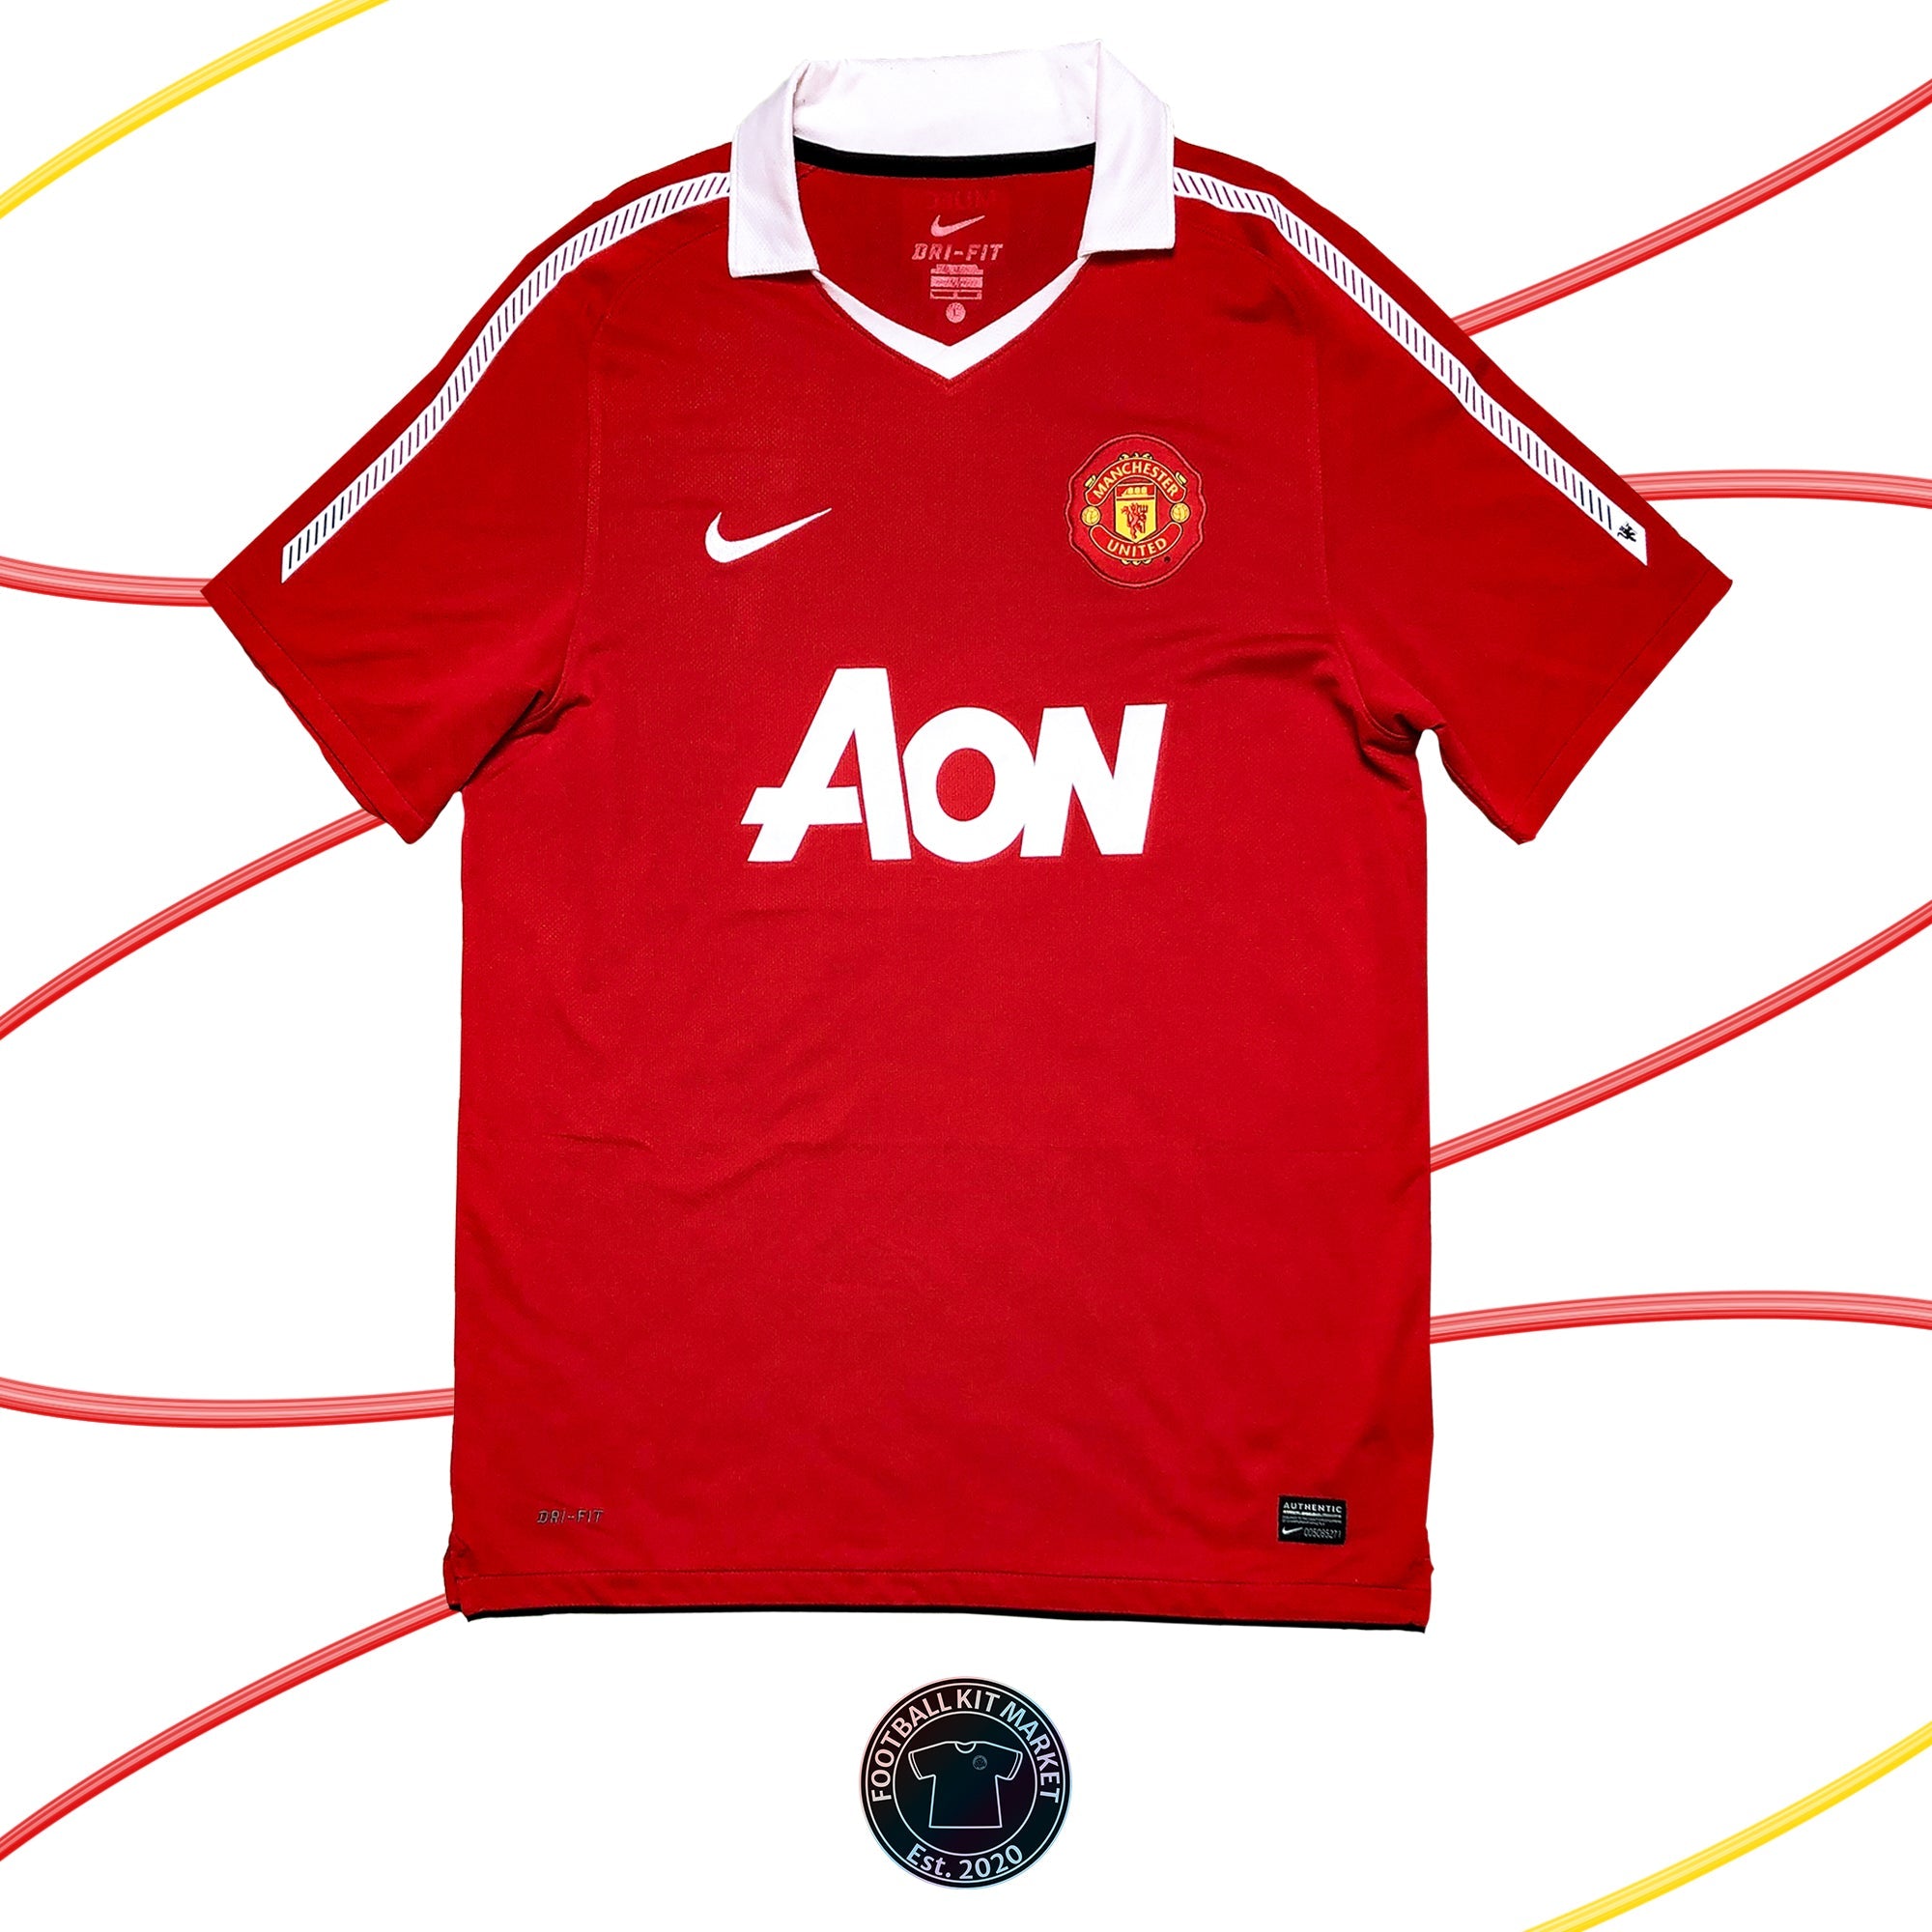 Genuine MANCHESTER UNITED Home (2010-2011) - NIKE (L) - Product Image from Football Kit Market